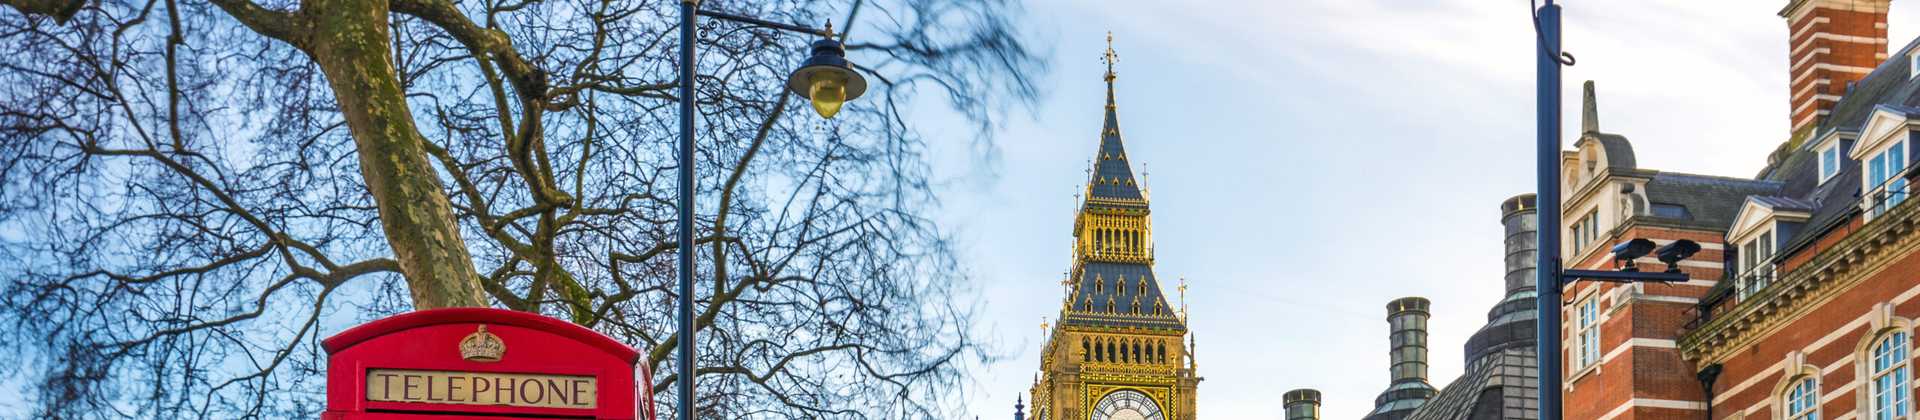 New Travel Authorization Requirements for UK Bound Travelers: Delays and Confusion Likely